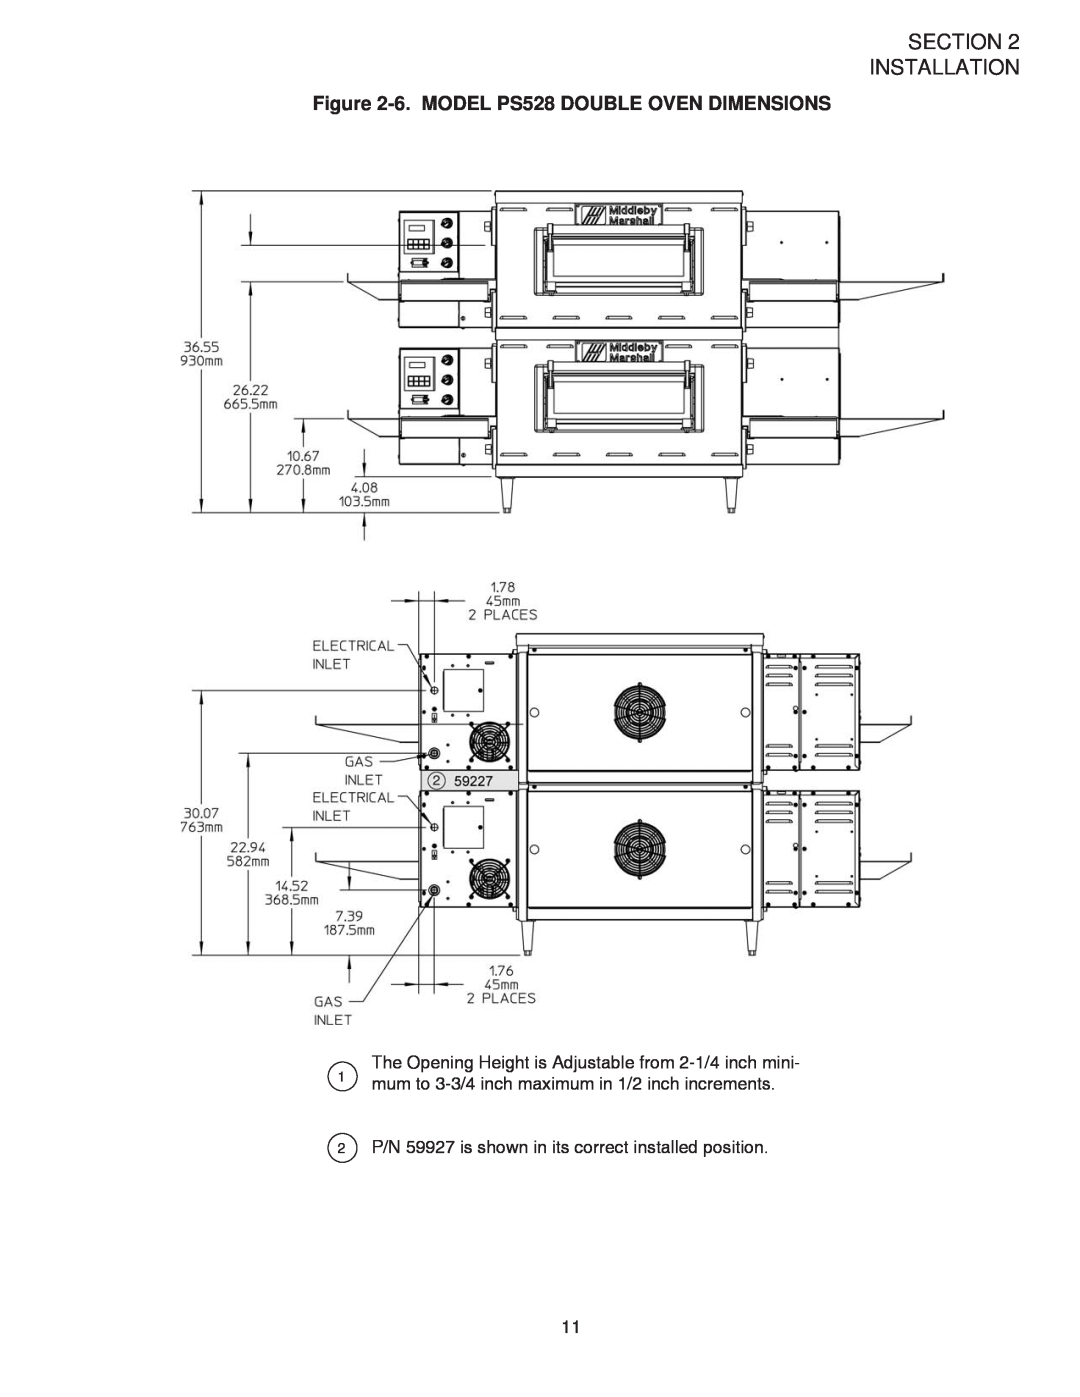 Middleby Marshall PS528G installation manual Section Installation, 6. MODEL PS528 DOUBLE OVEN DIMENSIONS 